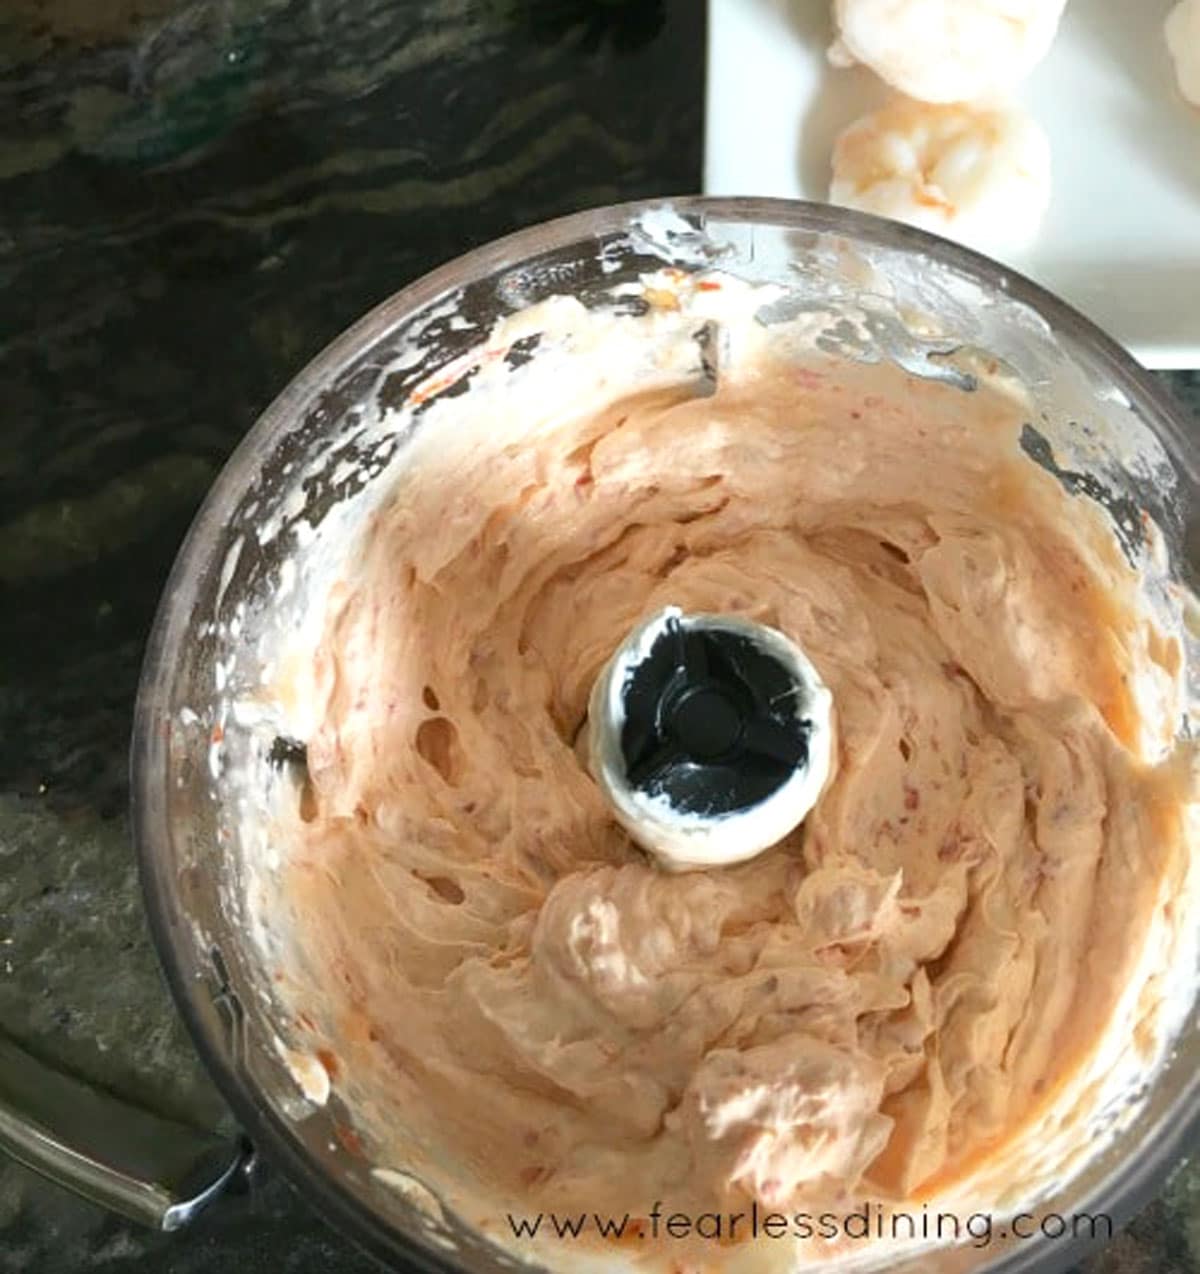 Whipped red pepper cream cheese in the food processor.